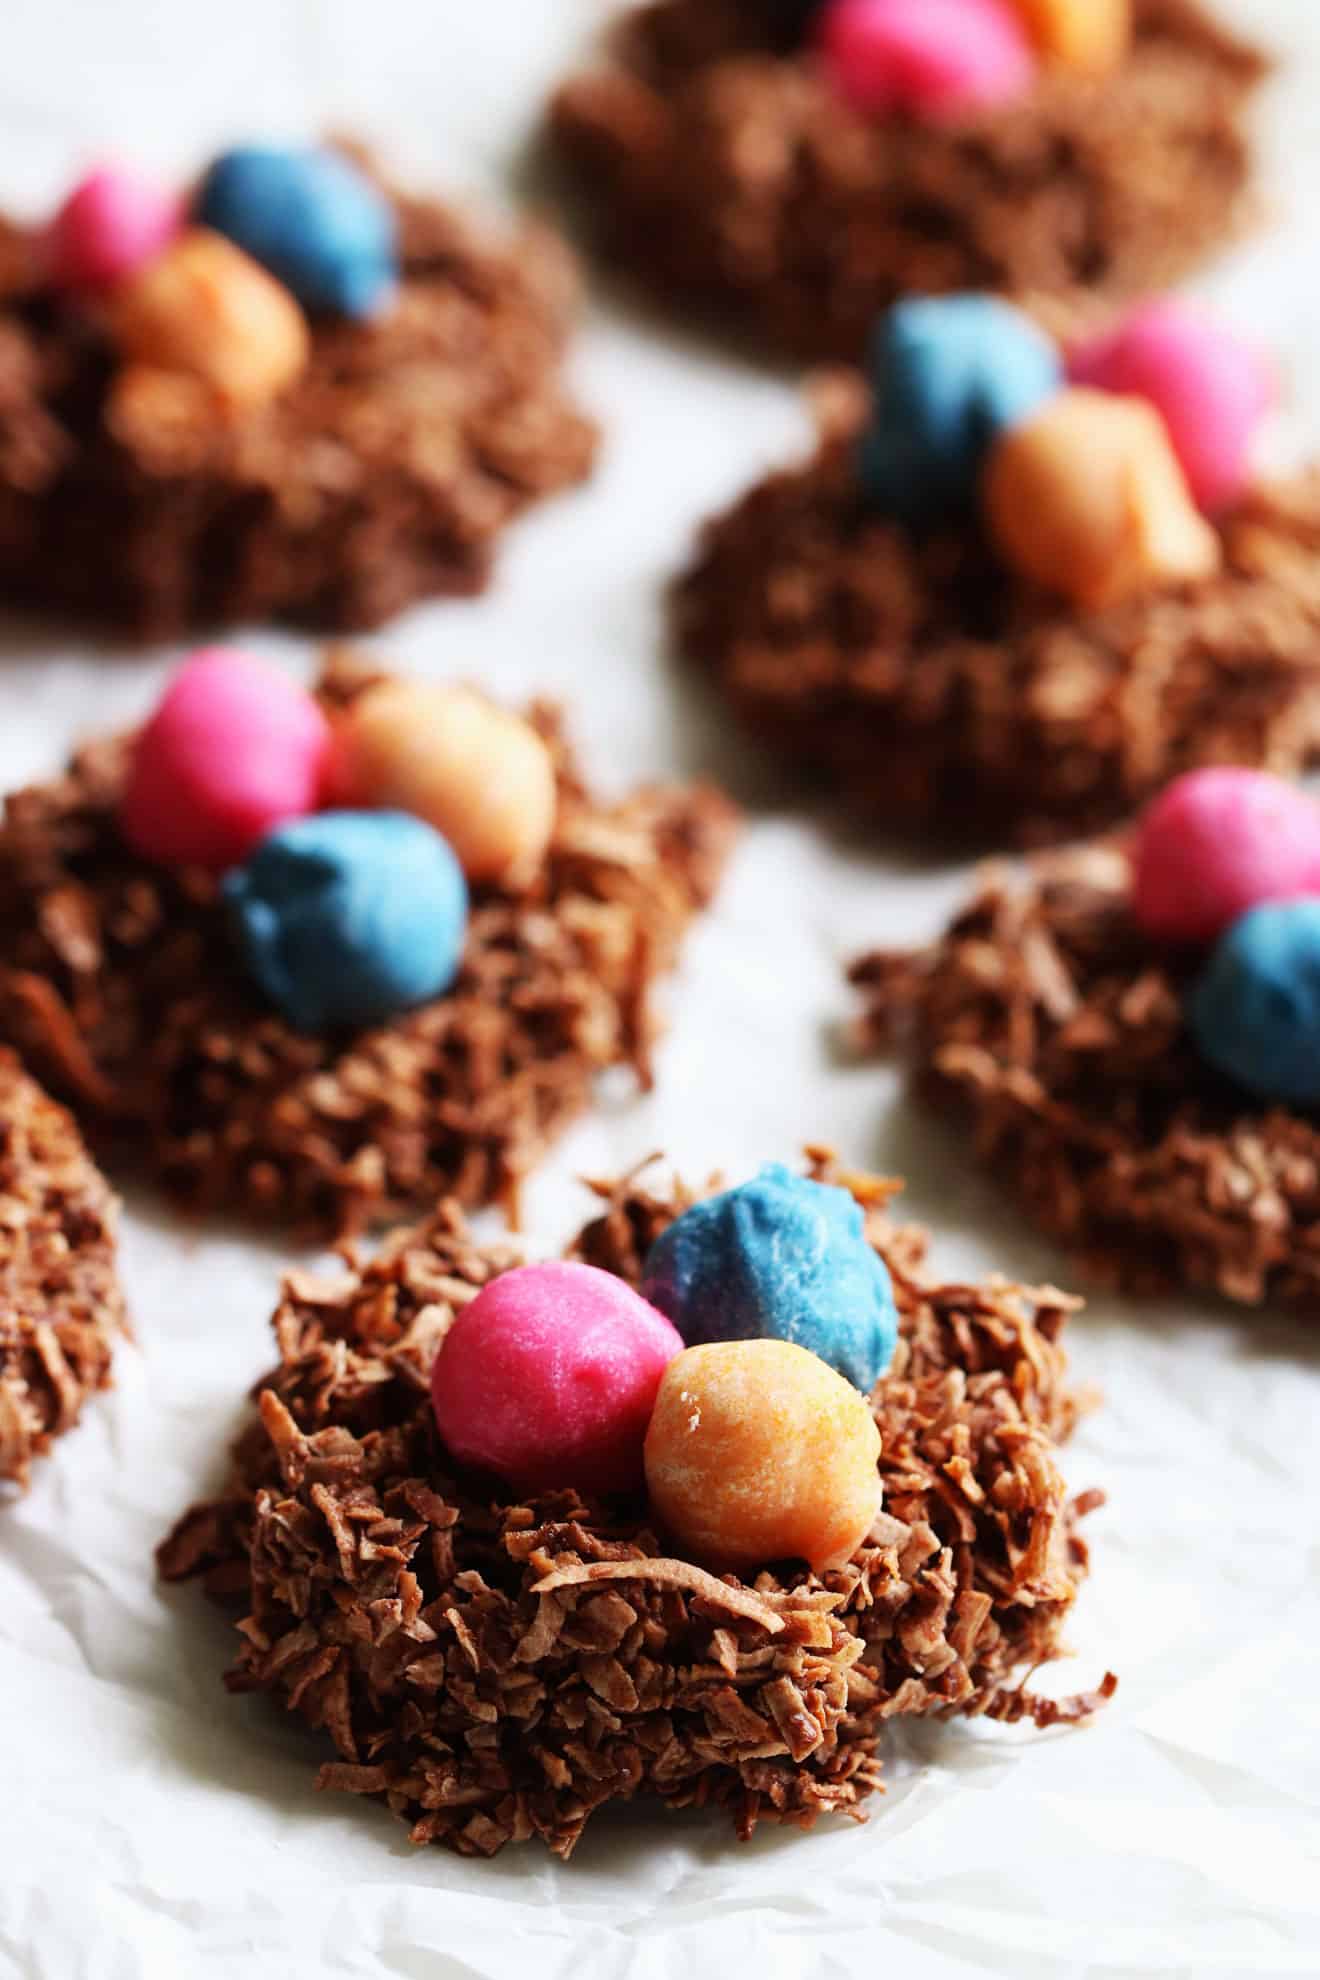 This is a side view of chocolate coconut birds nest cookies with colorful nuts in the center of each one. The cookies resemble a bird's nest and are sitting on a white piece of parchment paper. More cookies are blurred in the background.